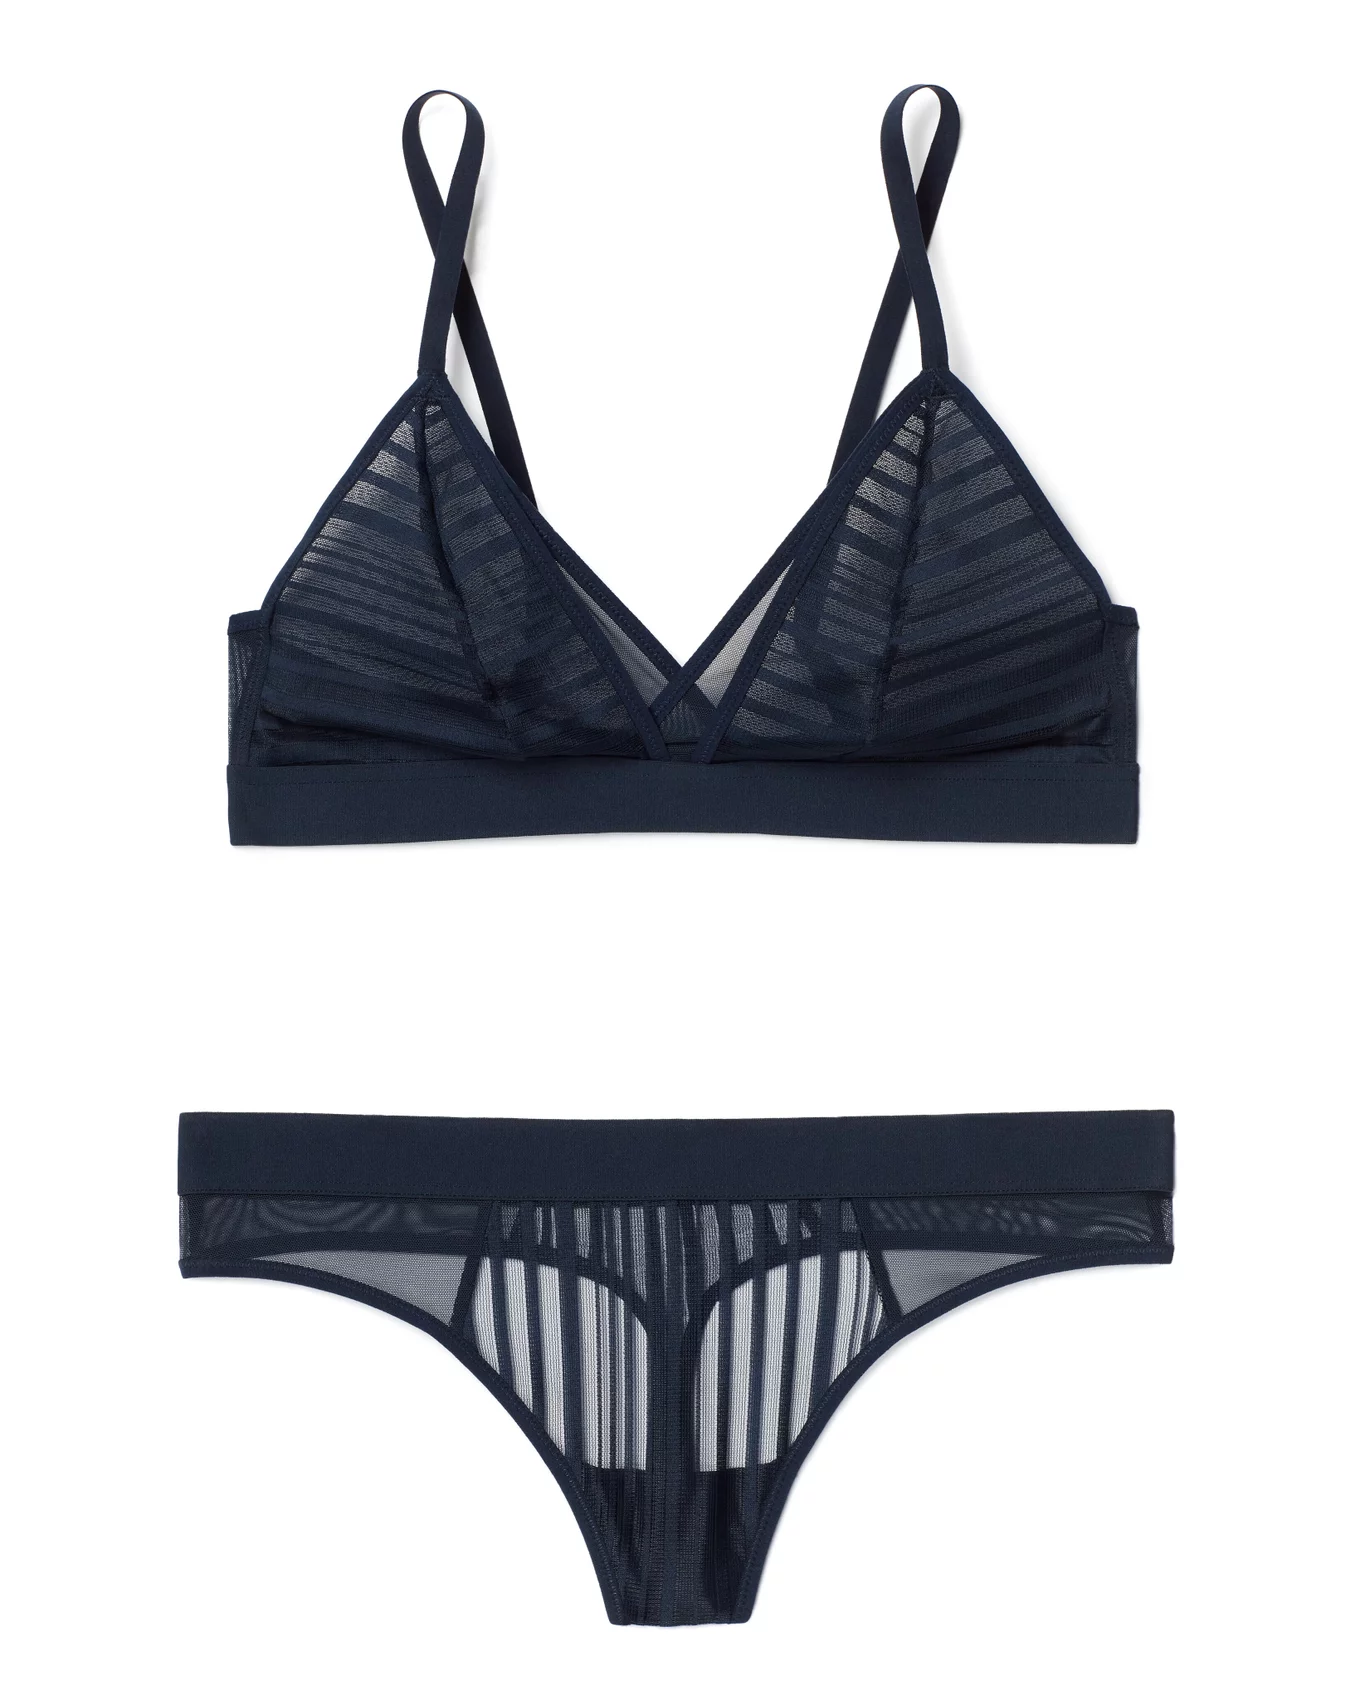 LILY Comfort Triangle Wireless Recycled Lace Bralette